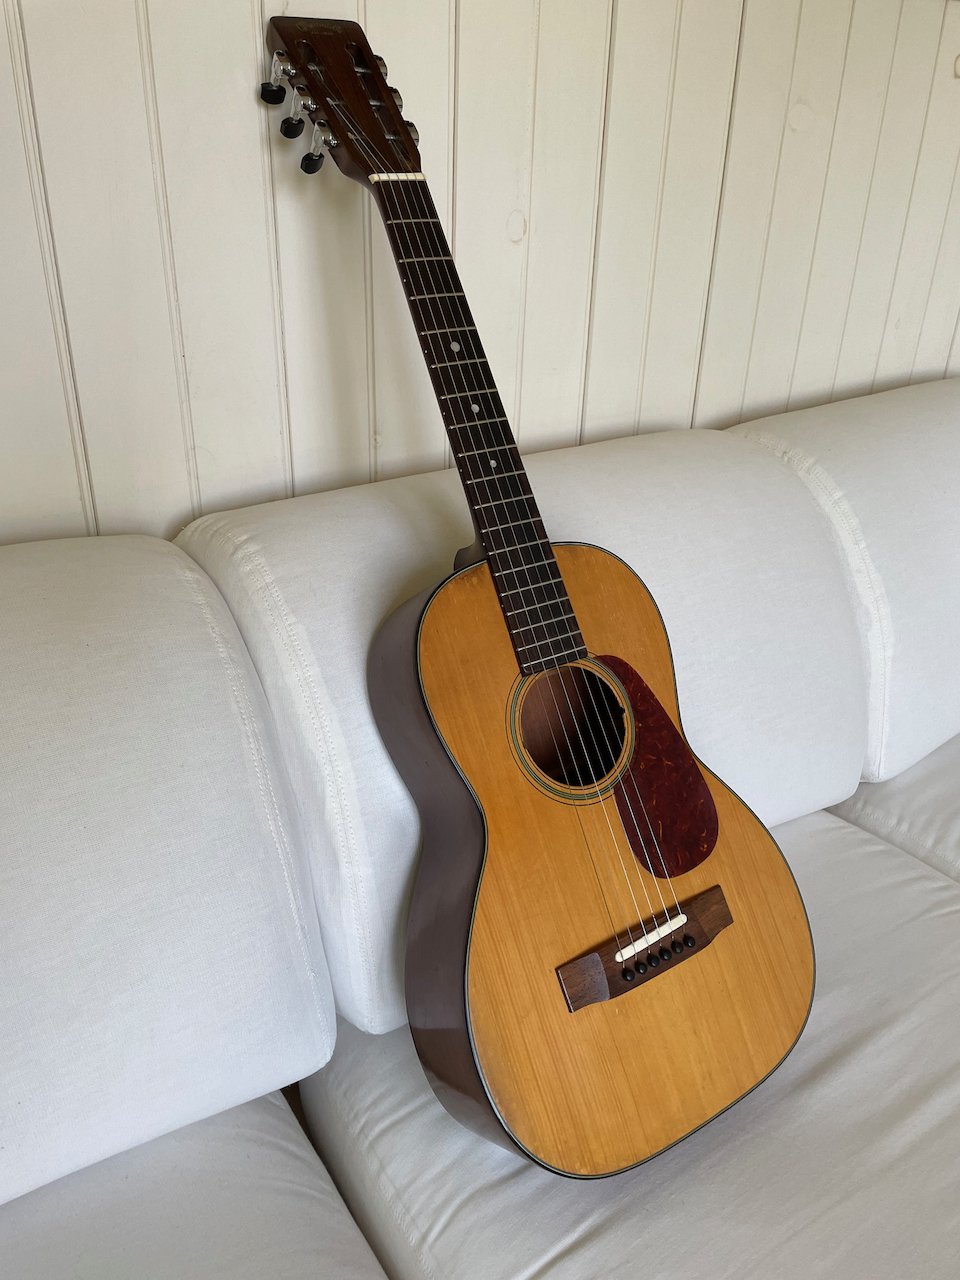  Michael Hedges gave Ackerman this 1949 Martin 5-18, a terz model designed to be tuned a minor third higher than a standard guitar. 